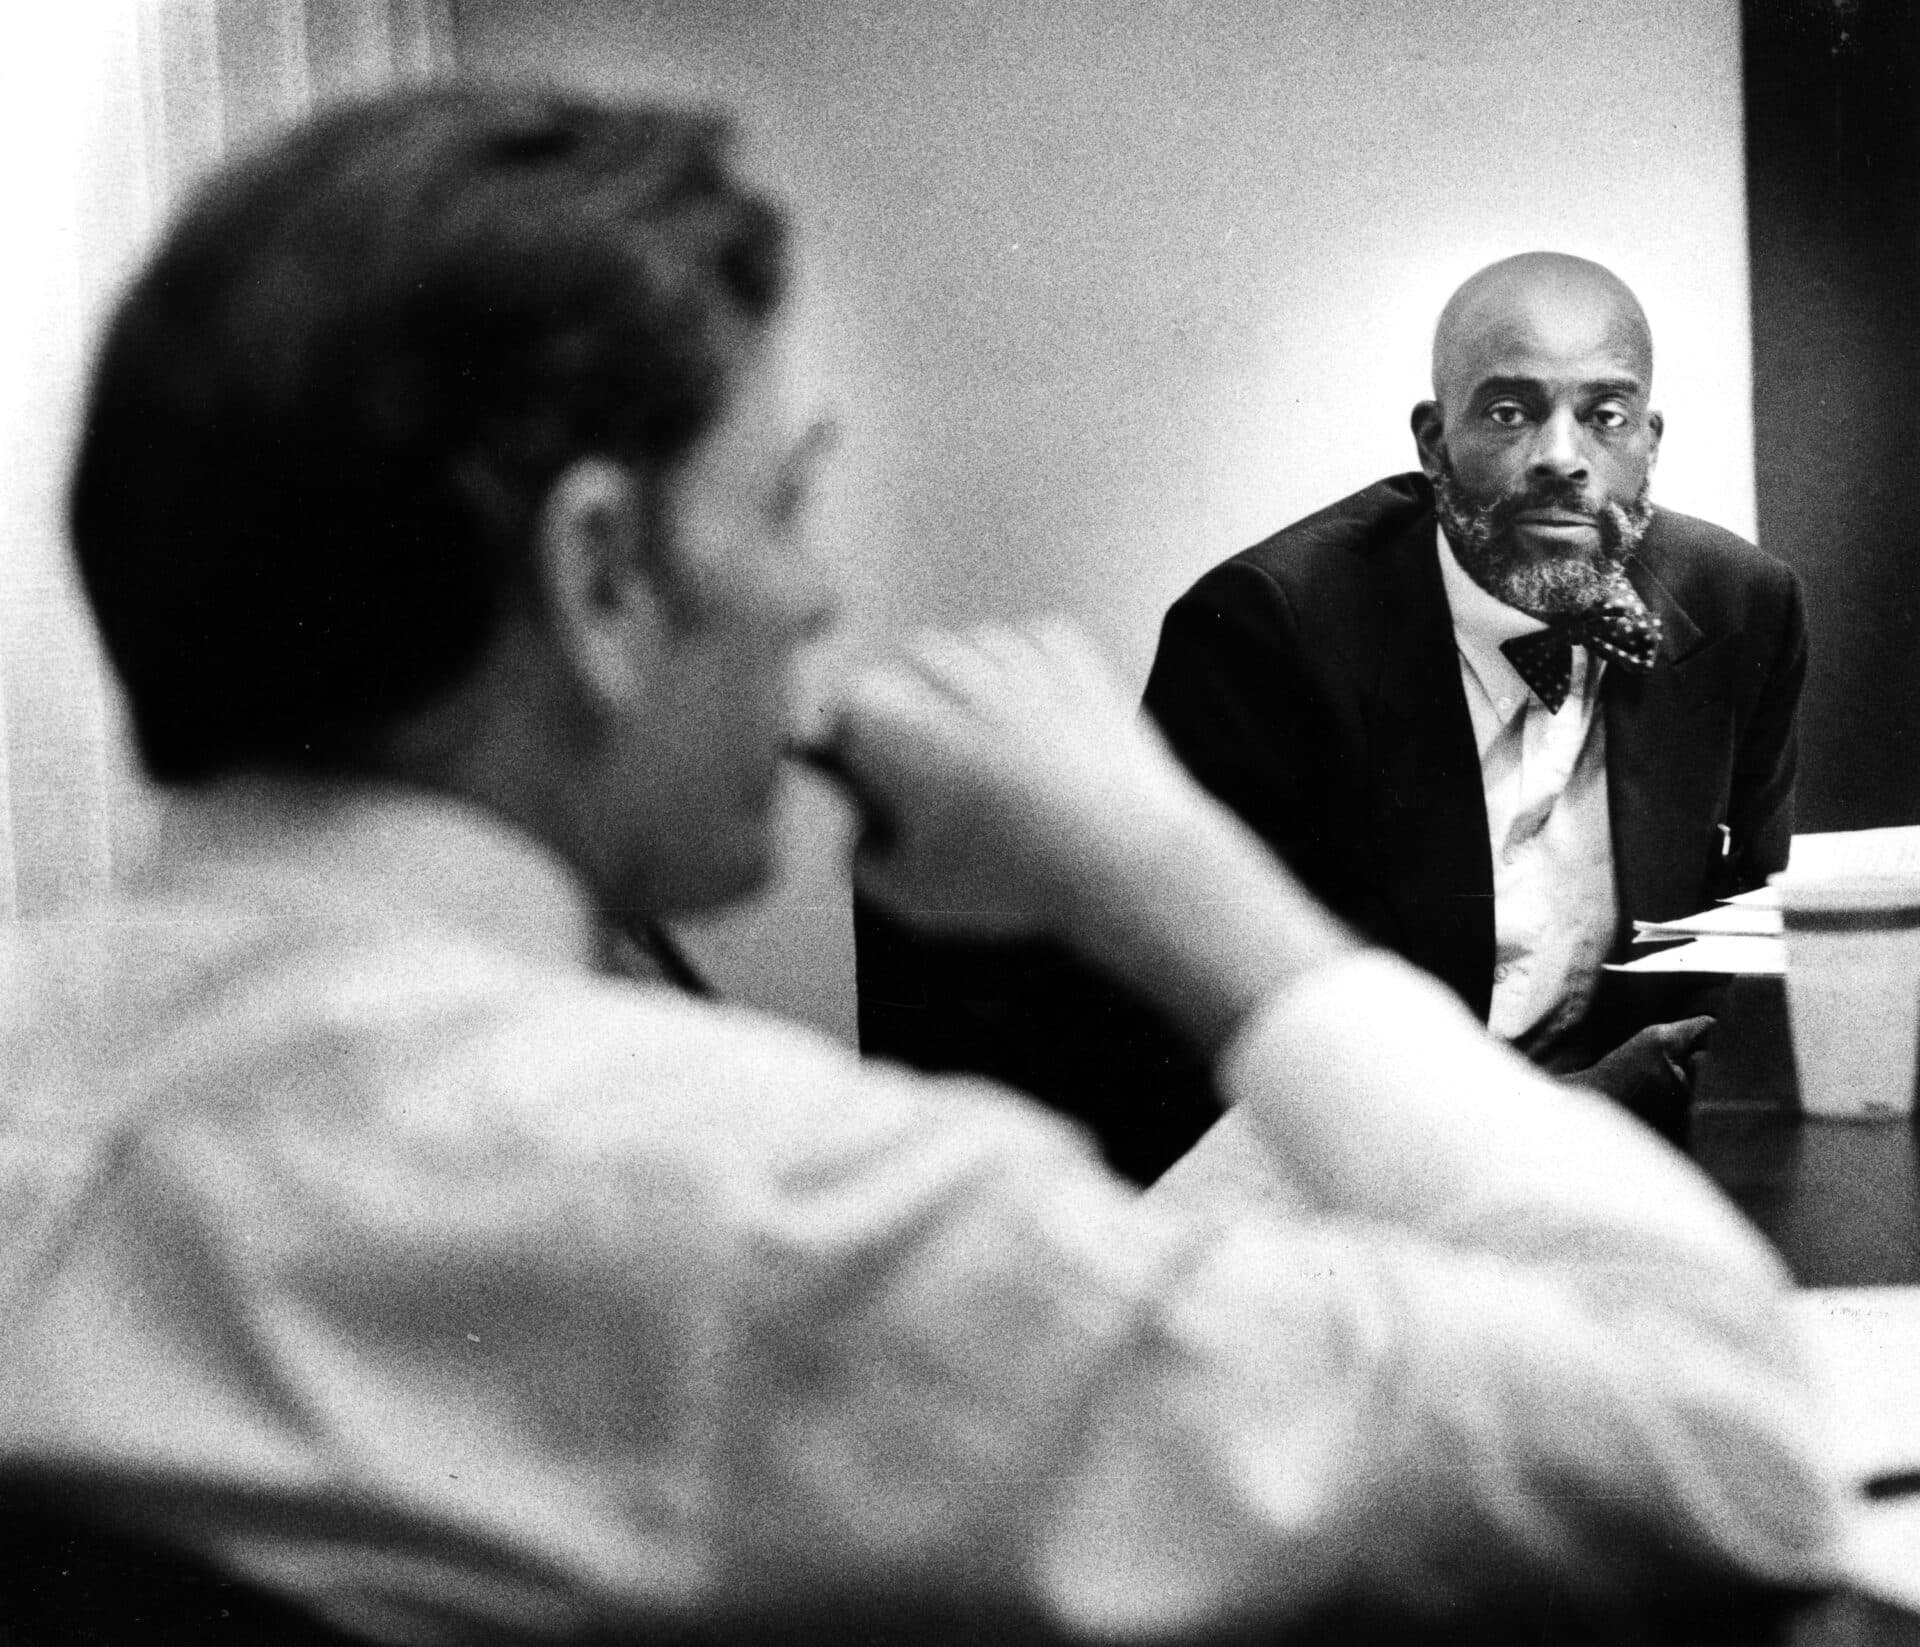 Boston mayoral candidate Mel King, right, listens to a question asked by opponent Ray Flynn in the Taylor Room at The Boston Globe in Boston on Oct. 27, 1983. (Photo by John Tlumacki/The Boston Globe via Getty Images)